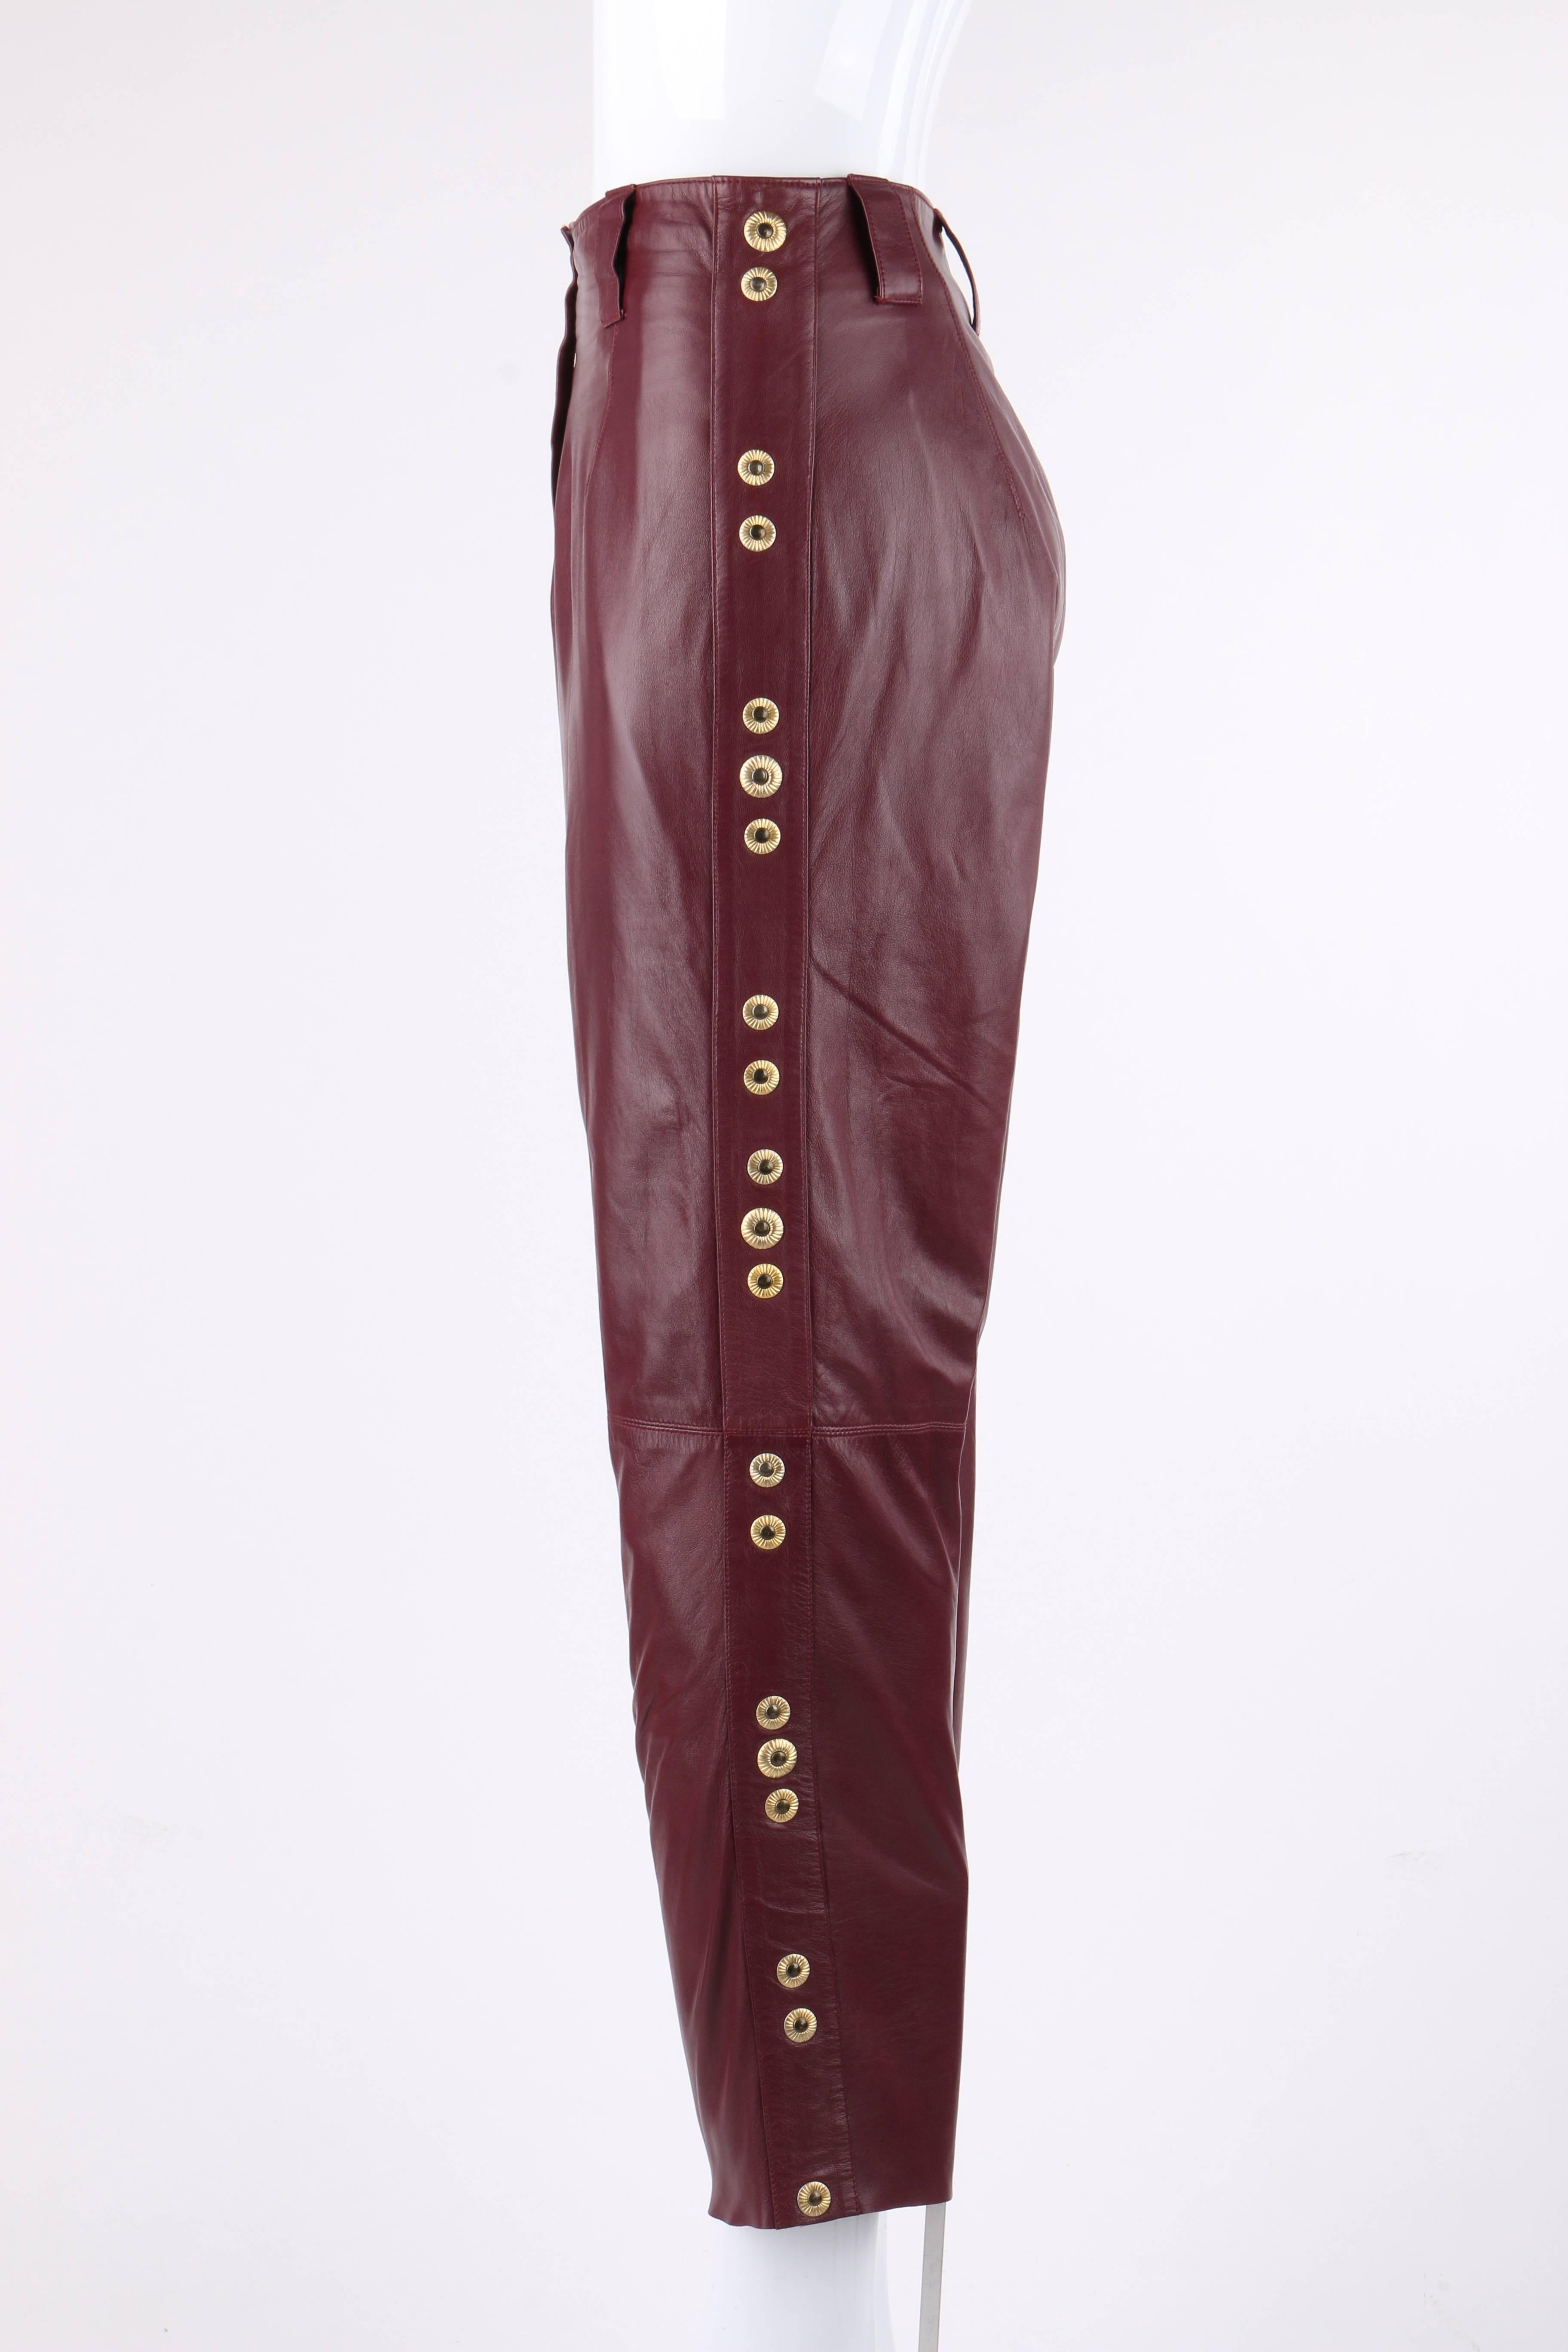 ROBERTO CAVALLI Burgundy Leather Studded Embellished Ankle Length Pants Trousers In Excellent Condition In Thiensville, WI